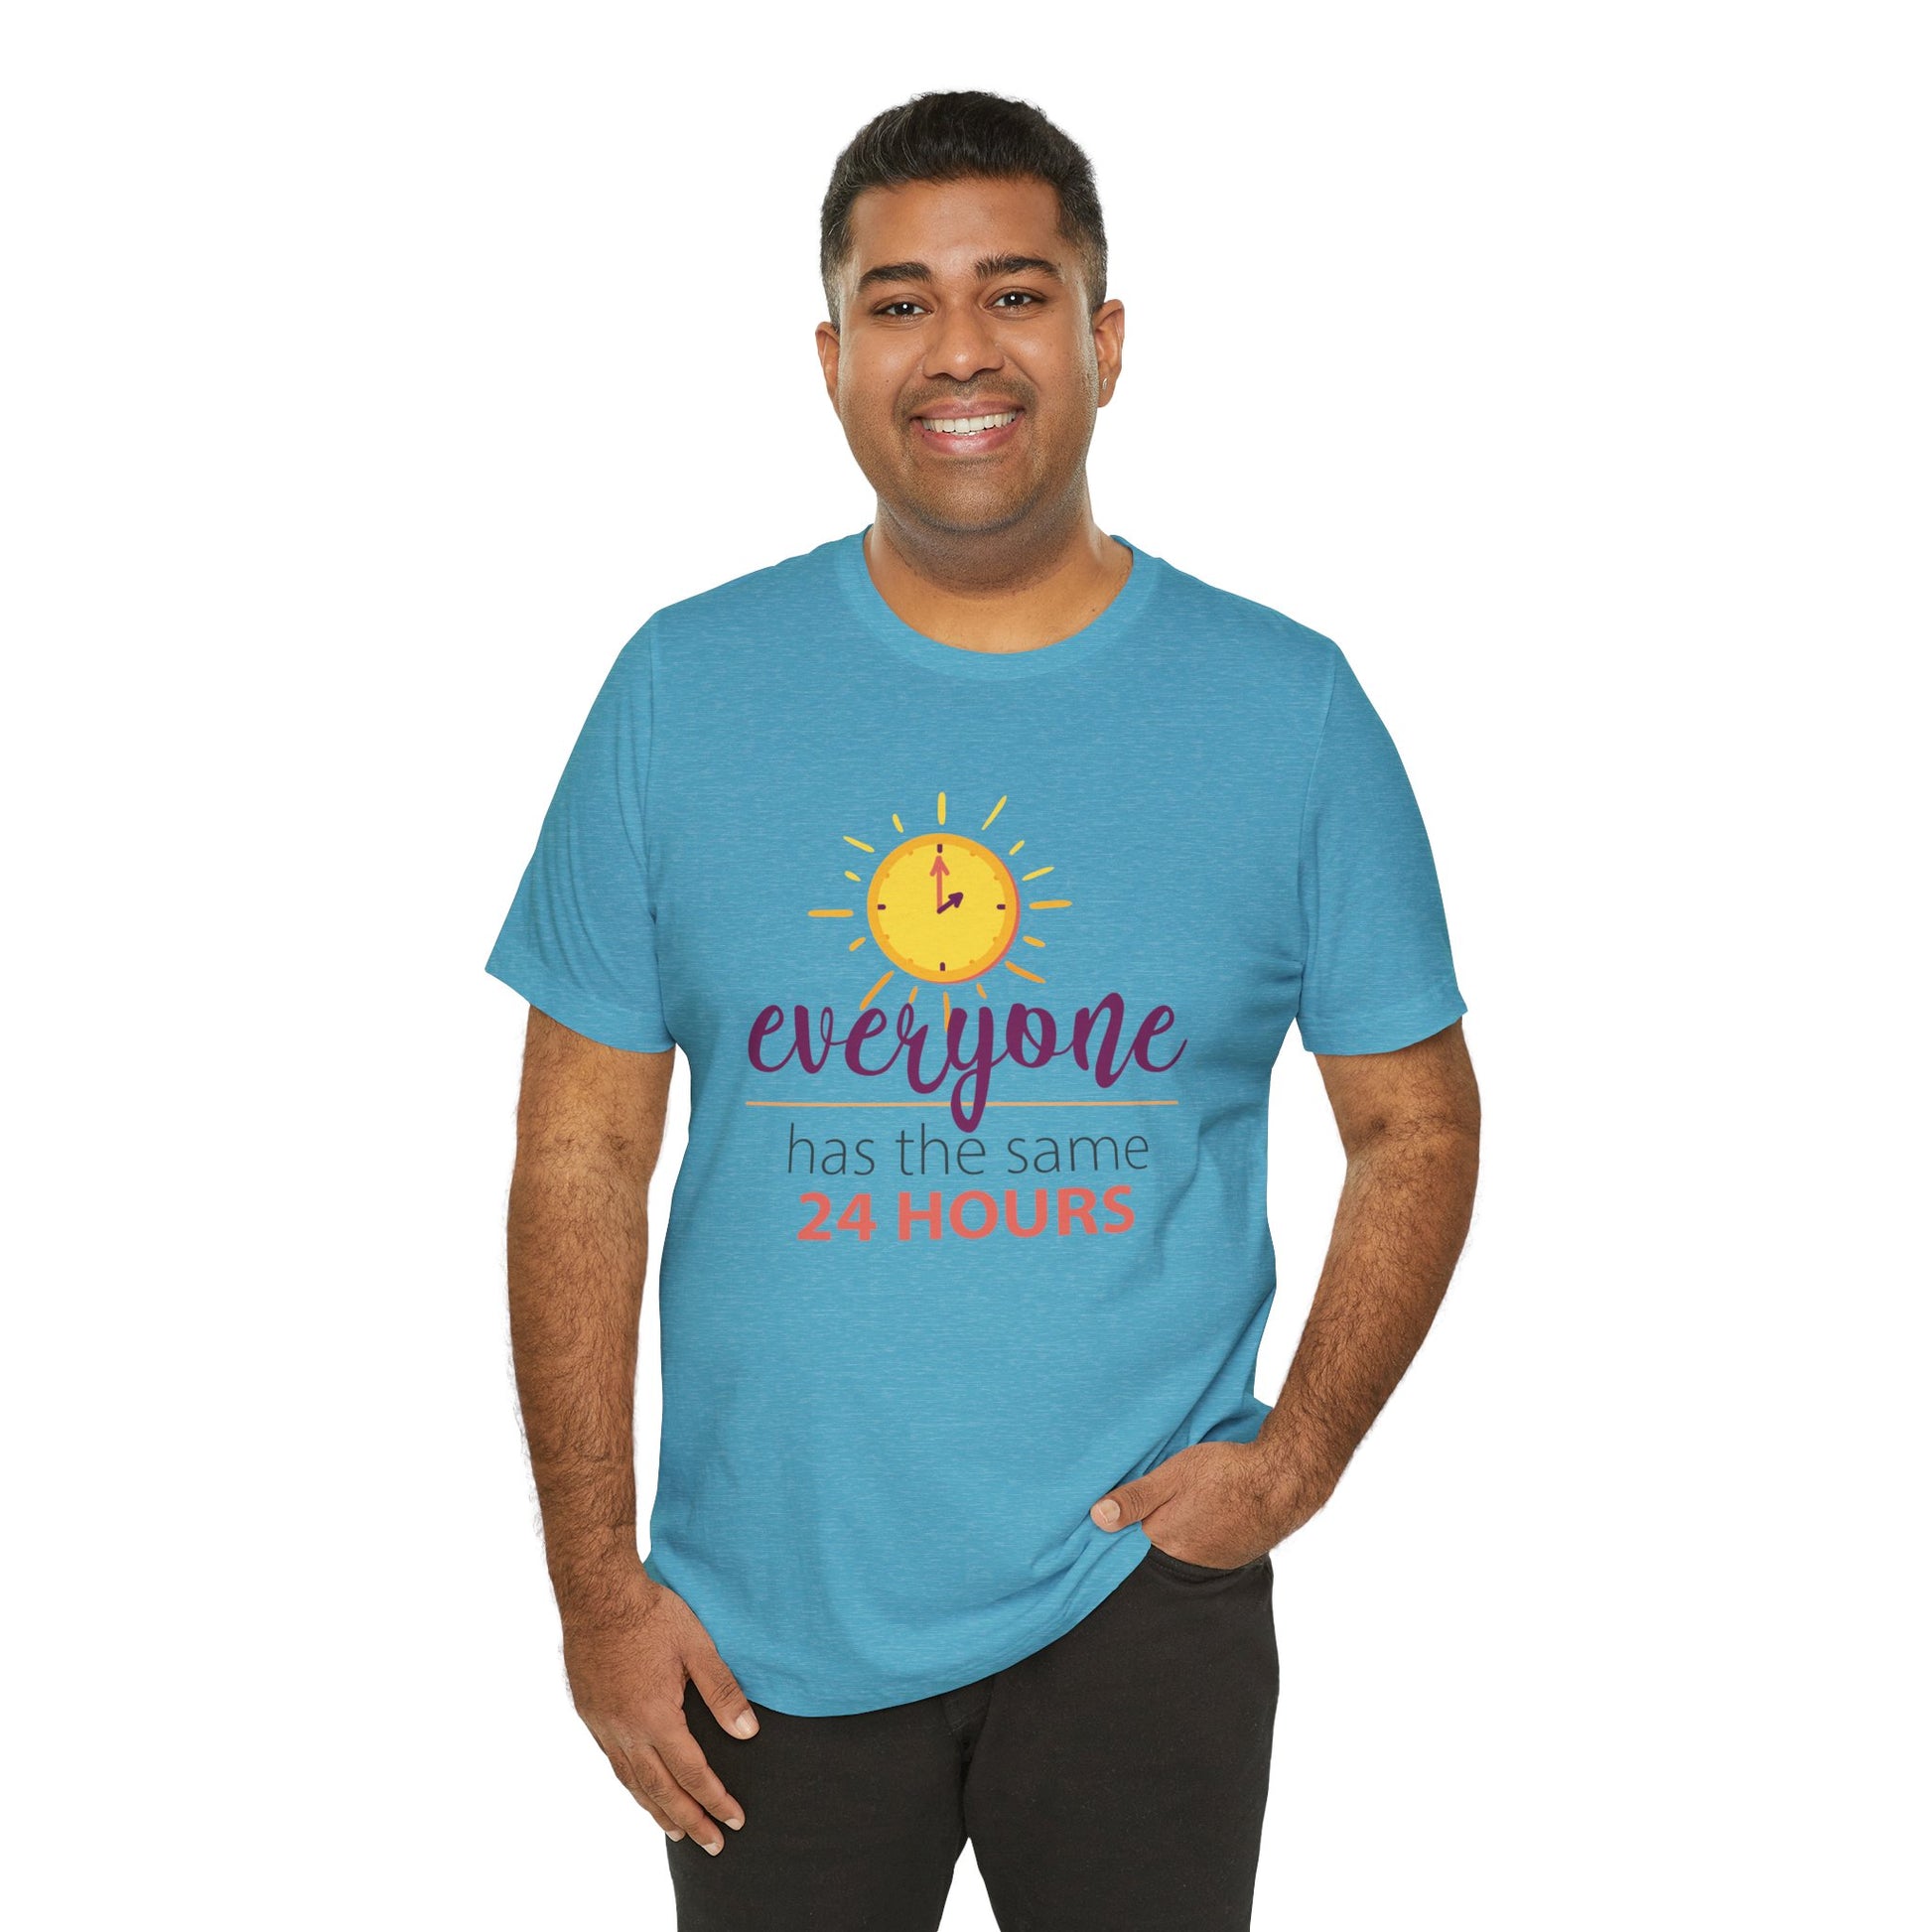 Everyone Has the Same 24 hours Inspirational Quote Short Sleeve T-Shirt - Unisex - Motivational Treats